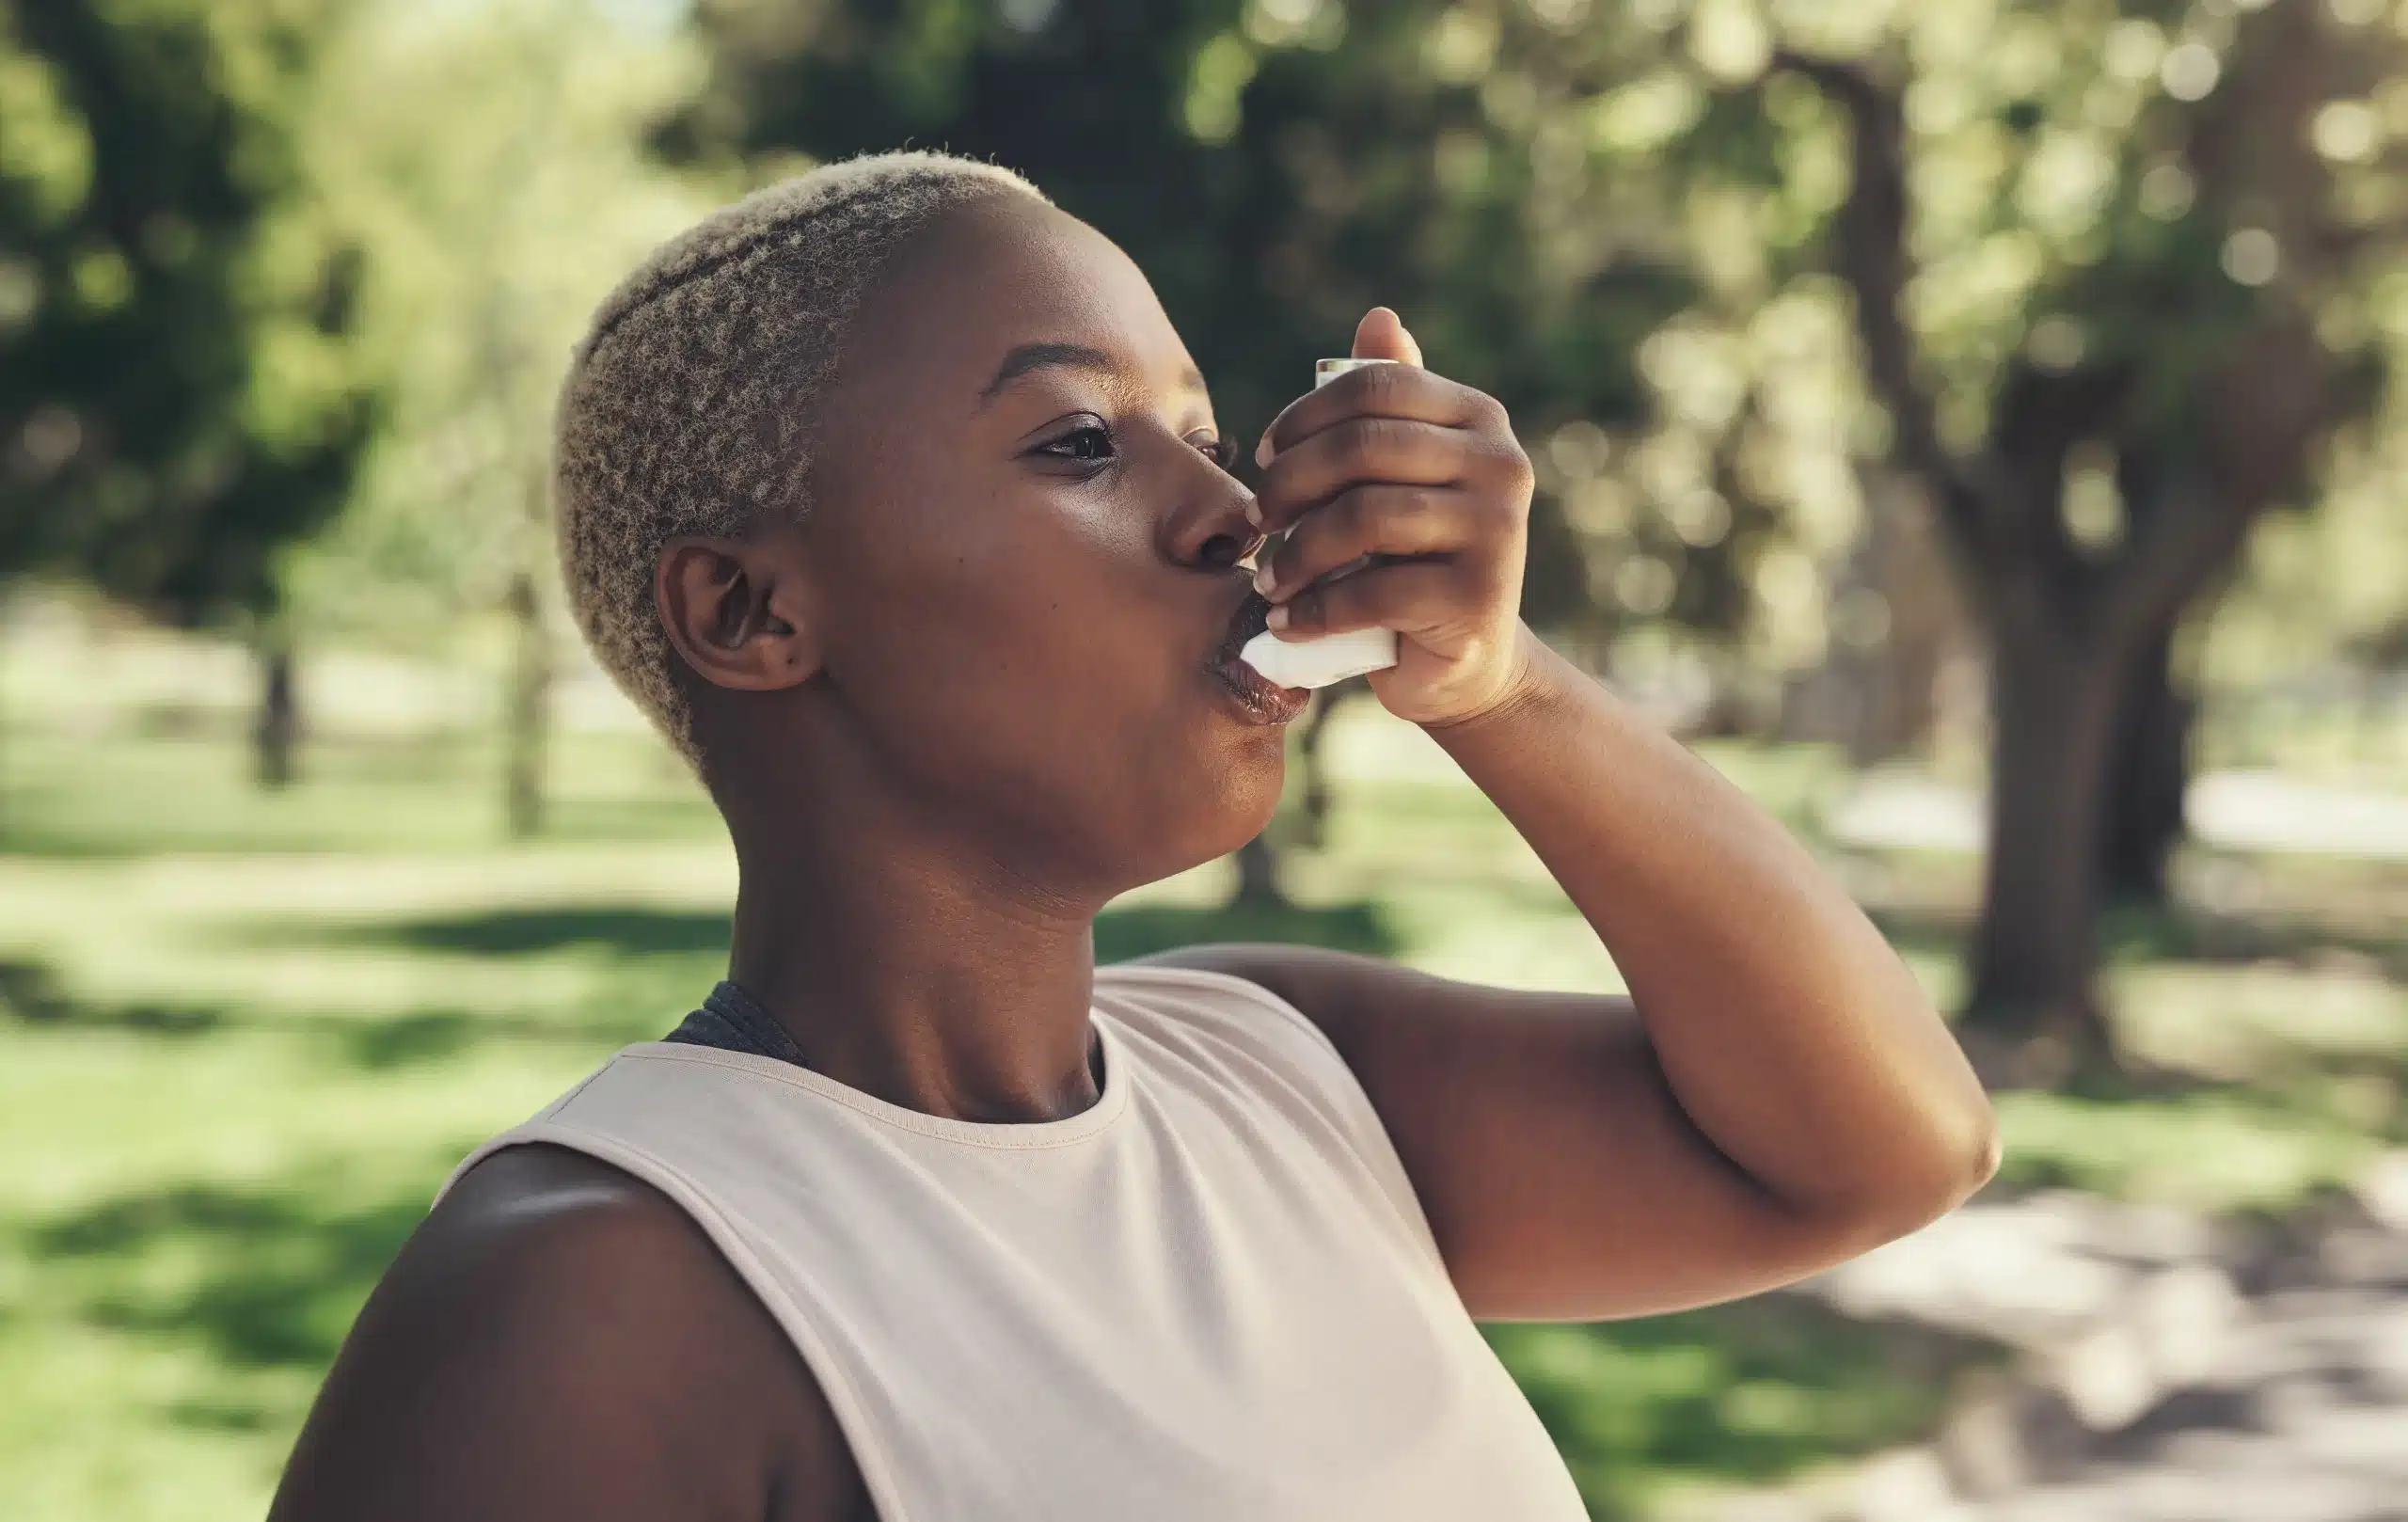 Black woman uses asthma inhaler after exercising outside.